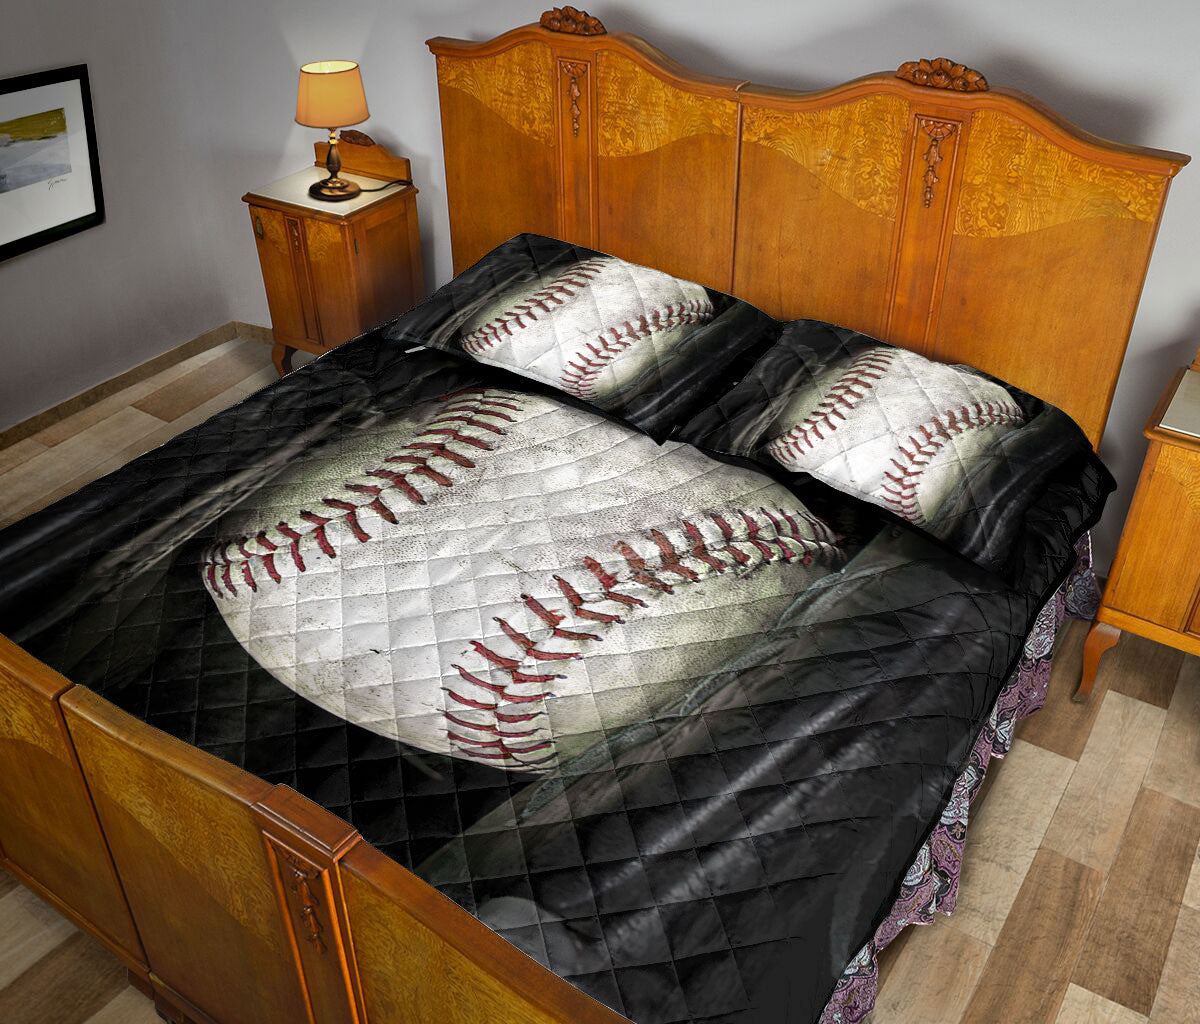 Ohaprints-Quilt-Bed-Set-Pillowcase-Baseball-Ball-Black-Glove-Gift-For-Sport-Fan-Lover-Custom-Personalized-Name-Blanket-Bedspread-Bedding-1674-Queen (80'' x 90'')